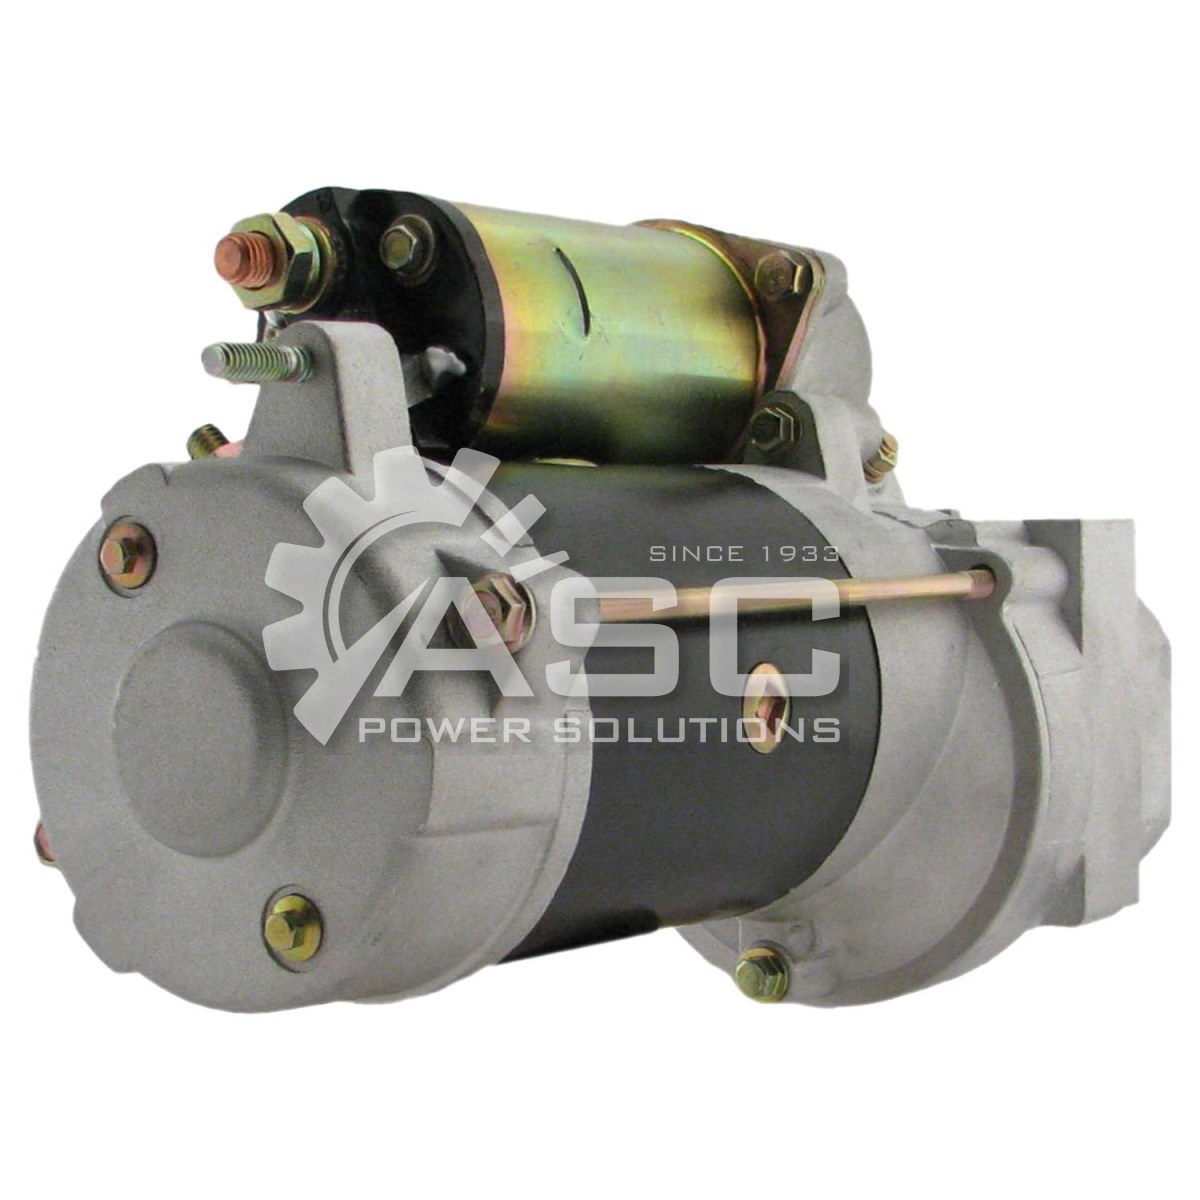 S122100_REMAN ASC POWER SOLUTIONS DELCO STARTER MOTOR FOR MILITARY EQUIPMENT WITH 6.2 LITTER ENGINES 24V 10 TOOTH CLOCKWISE ROTATION OFF SET GEAR REDUCTION (OSGR) 4KW